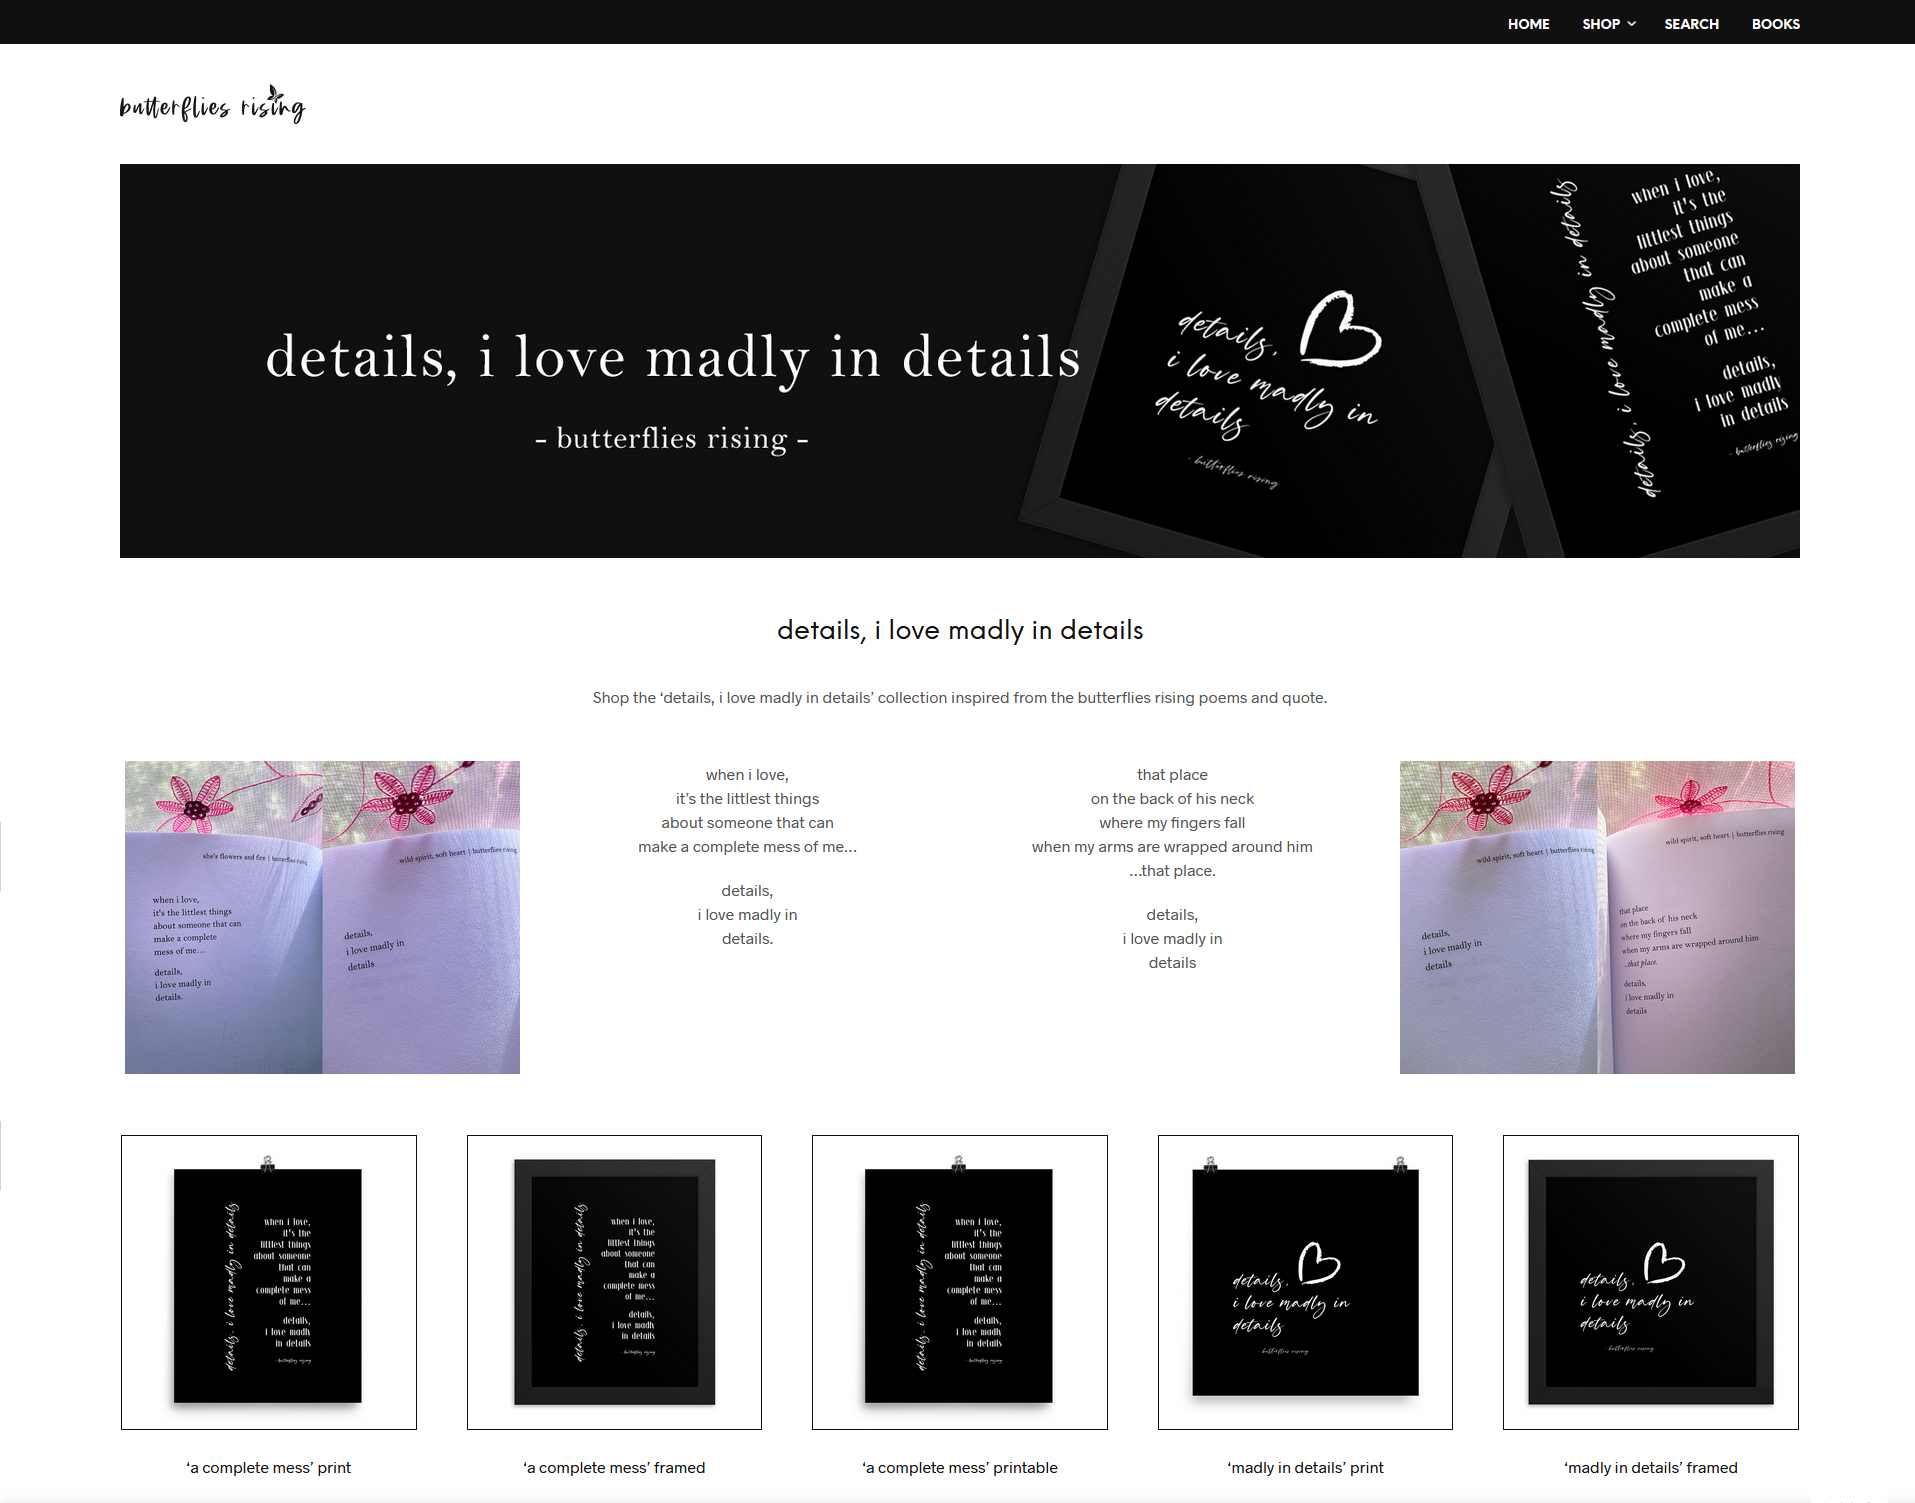 details, i love madly in details - butterflies rising poetry shop collection